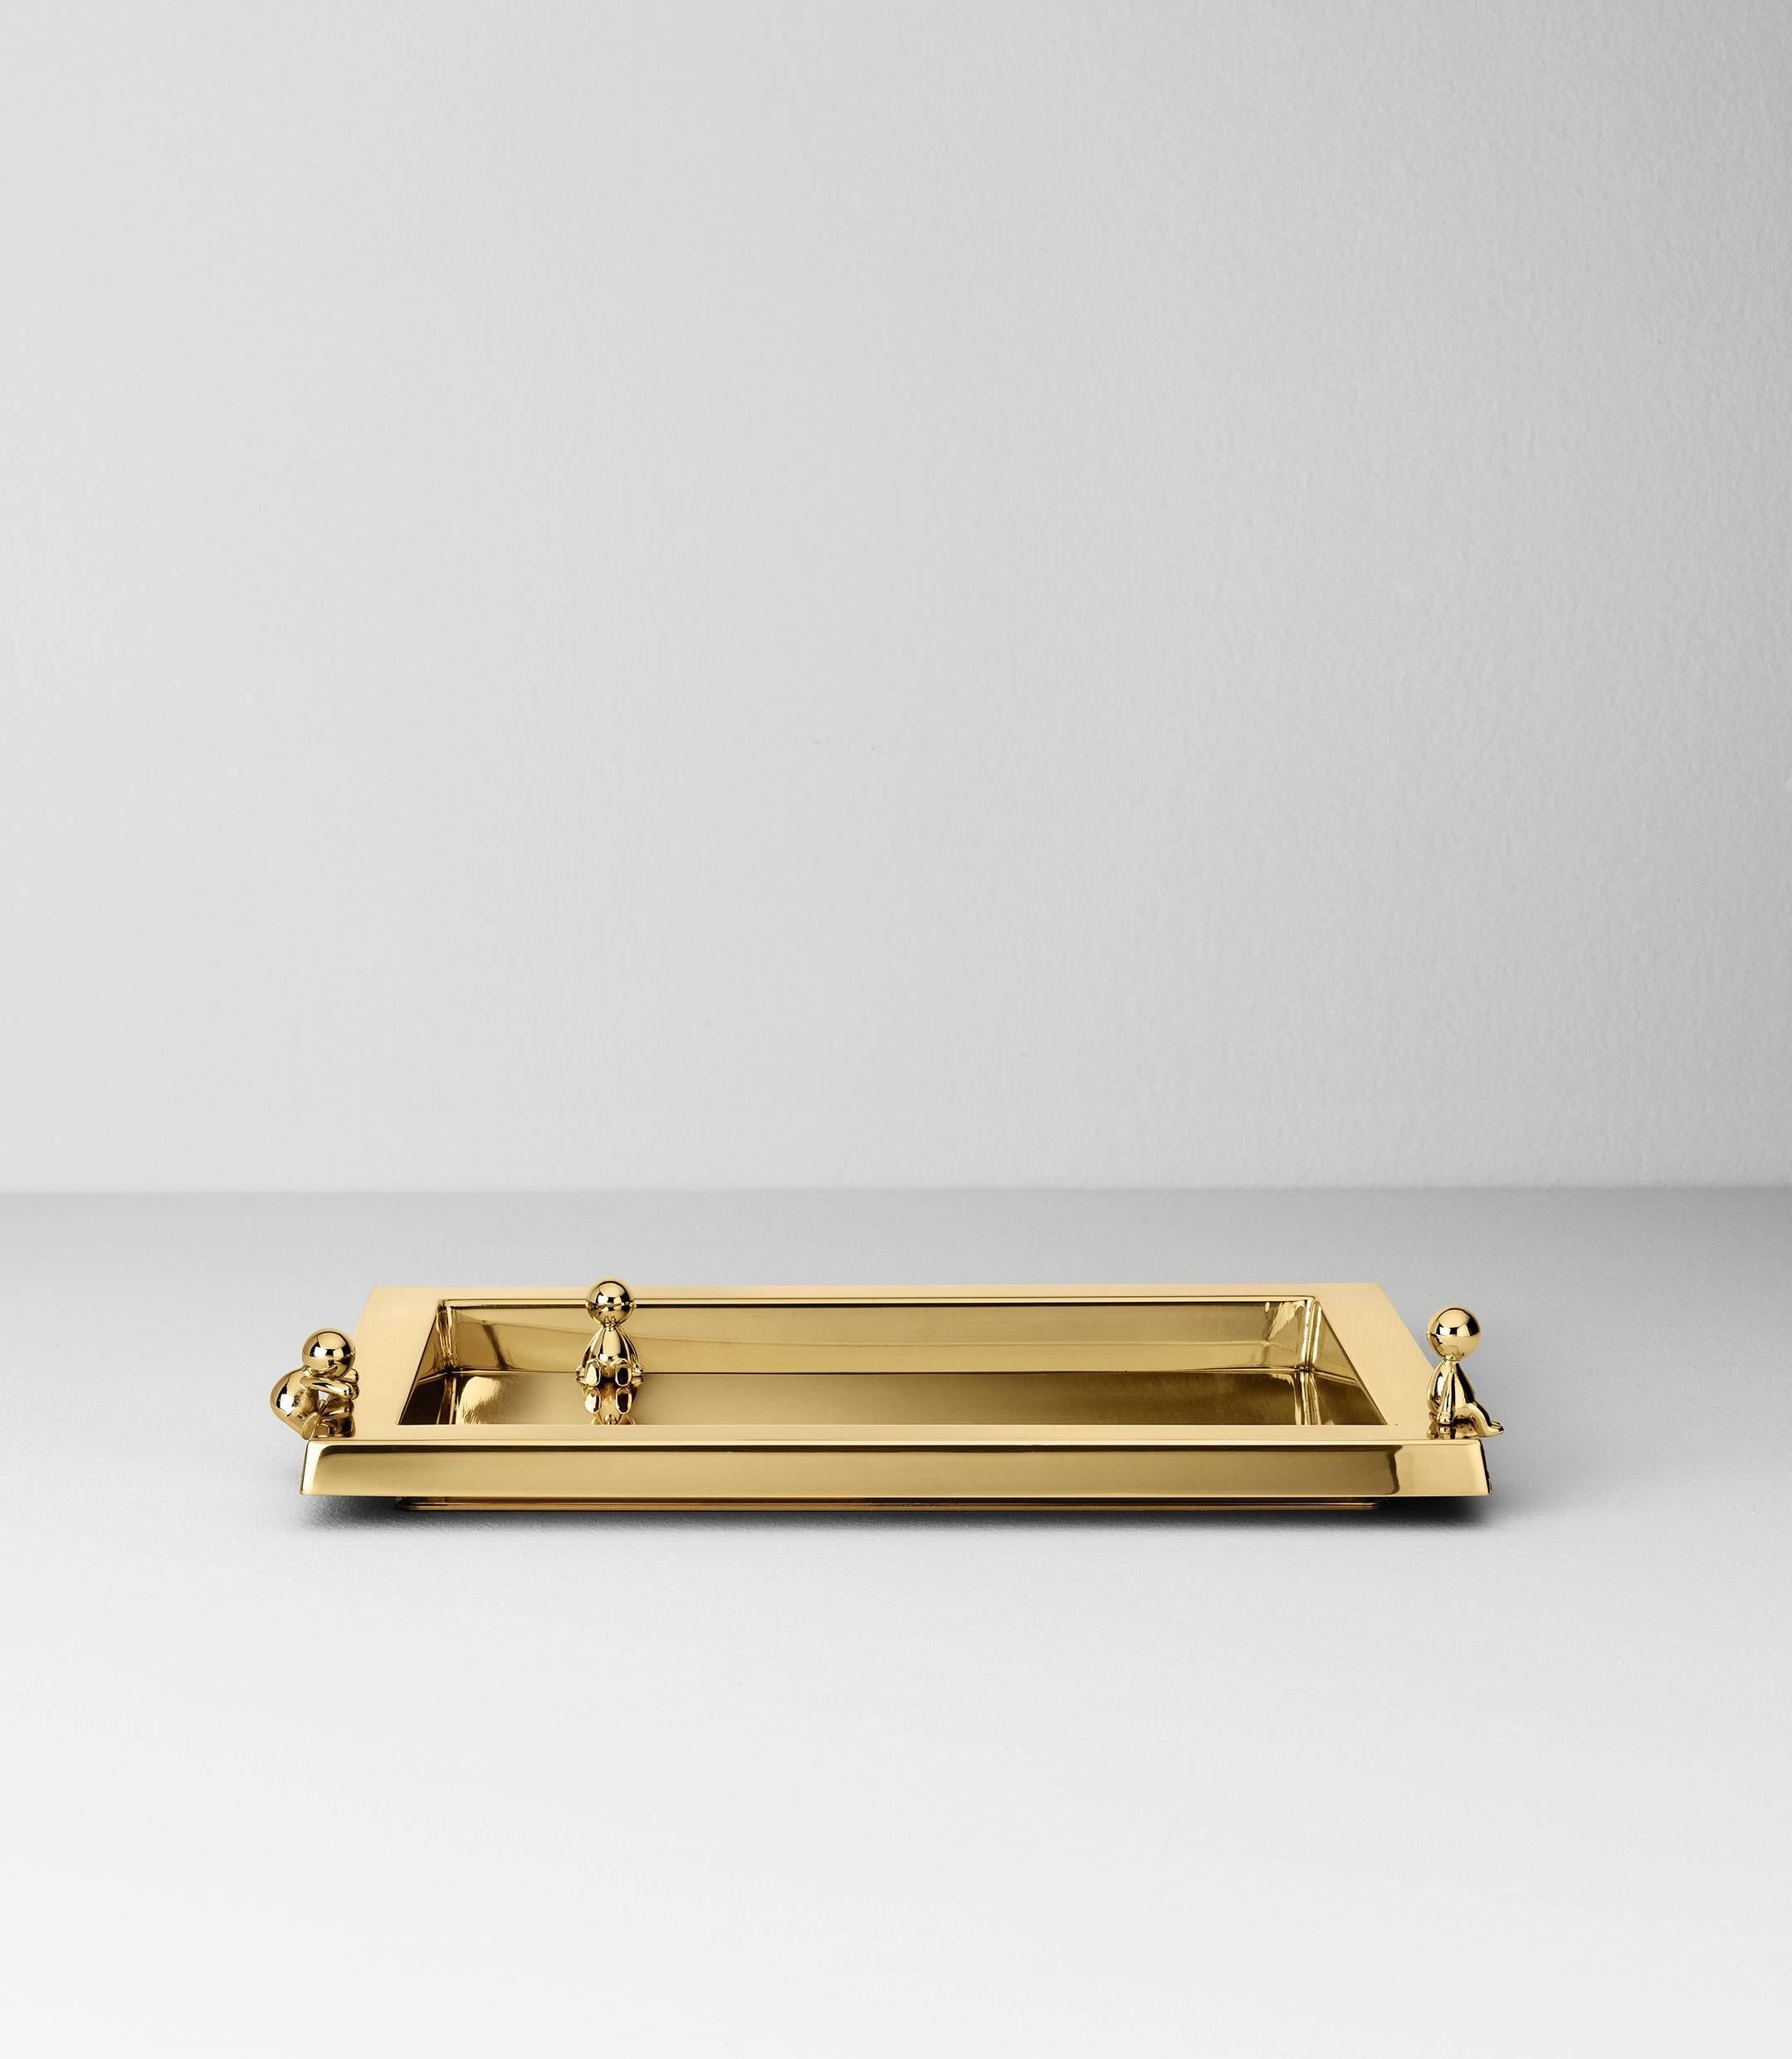 Serving tray in stainless steel finished in polished brass designed by Stefano Giovannoni.